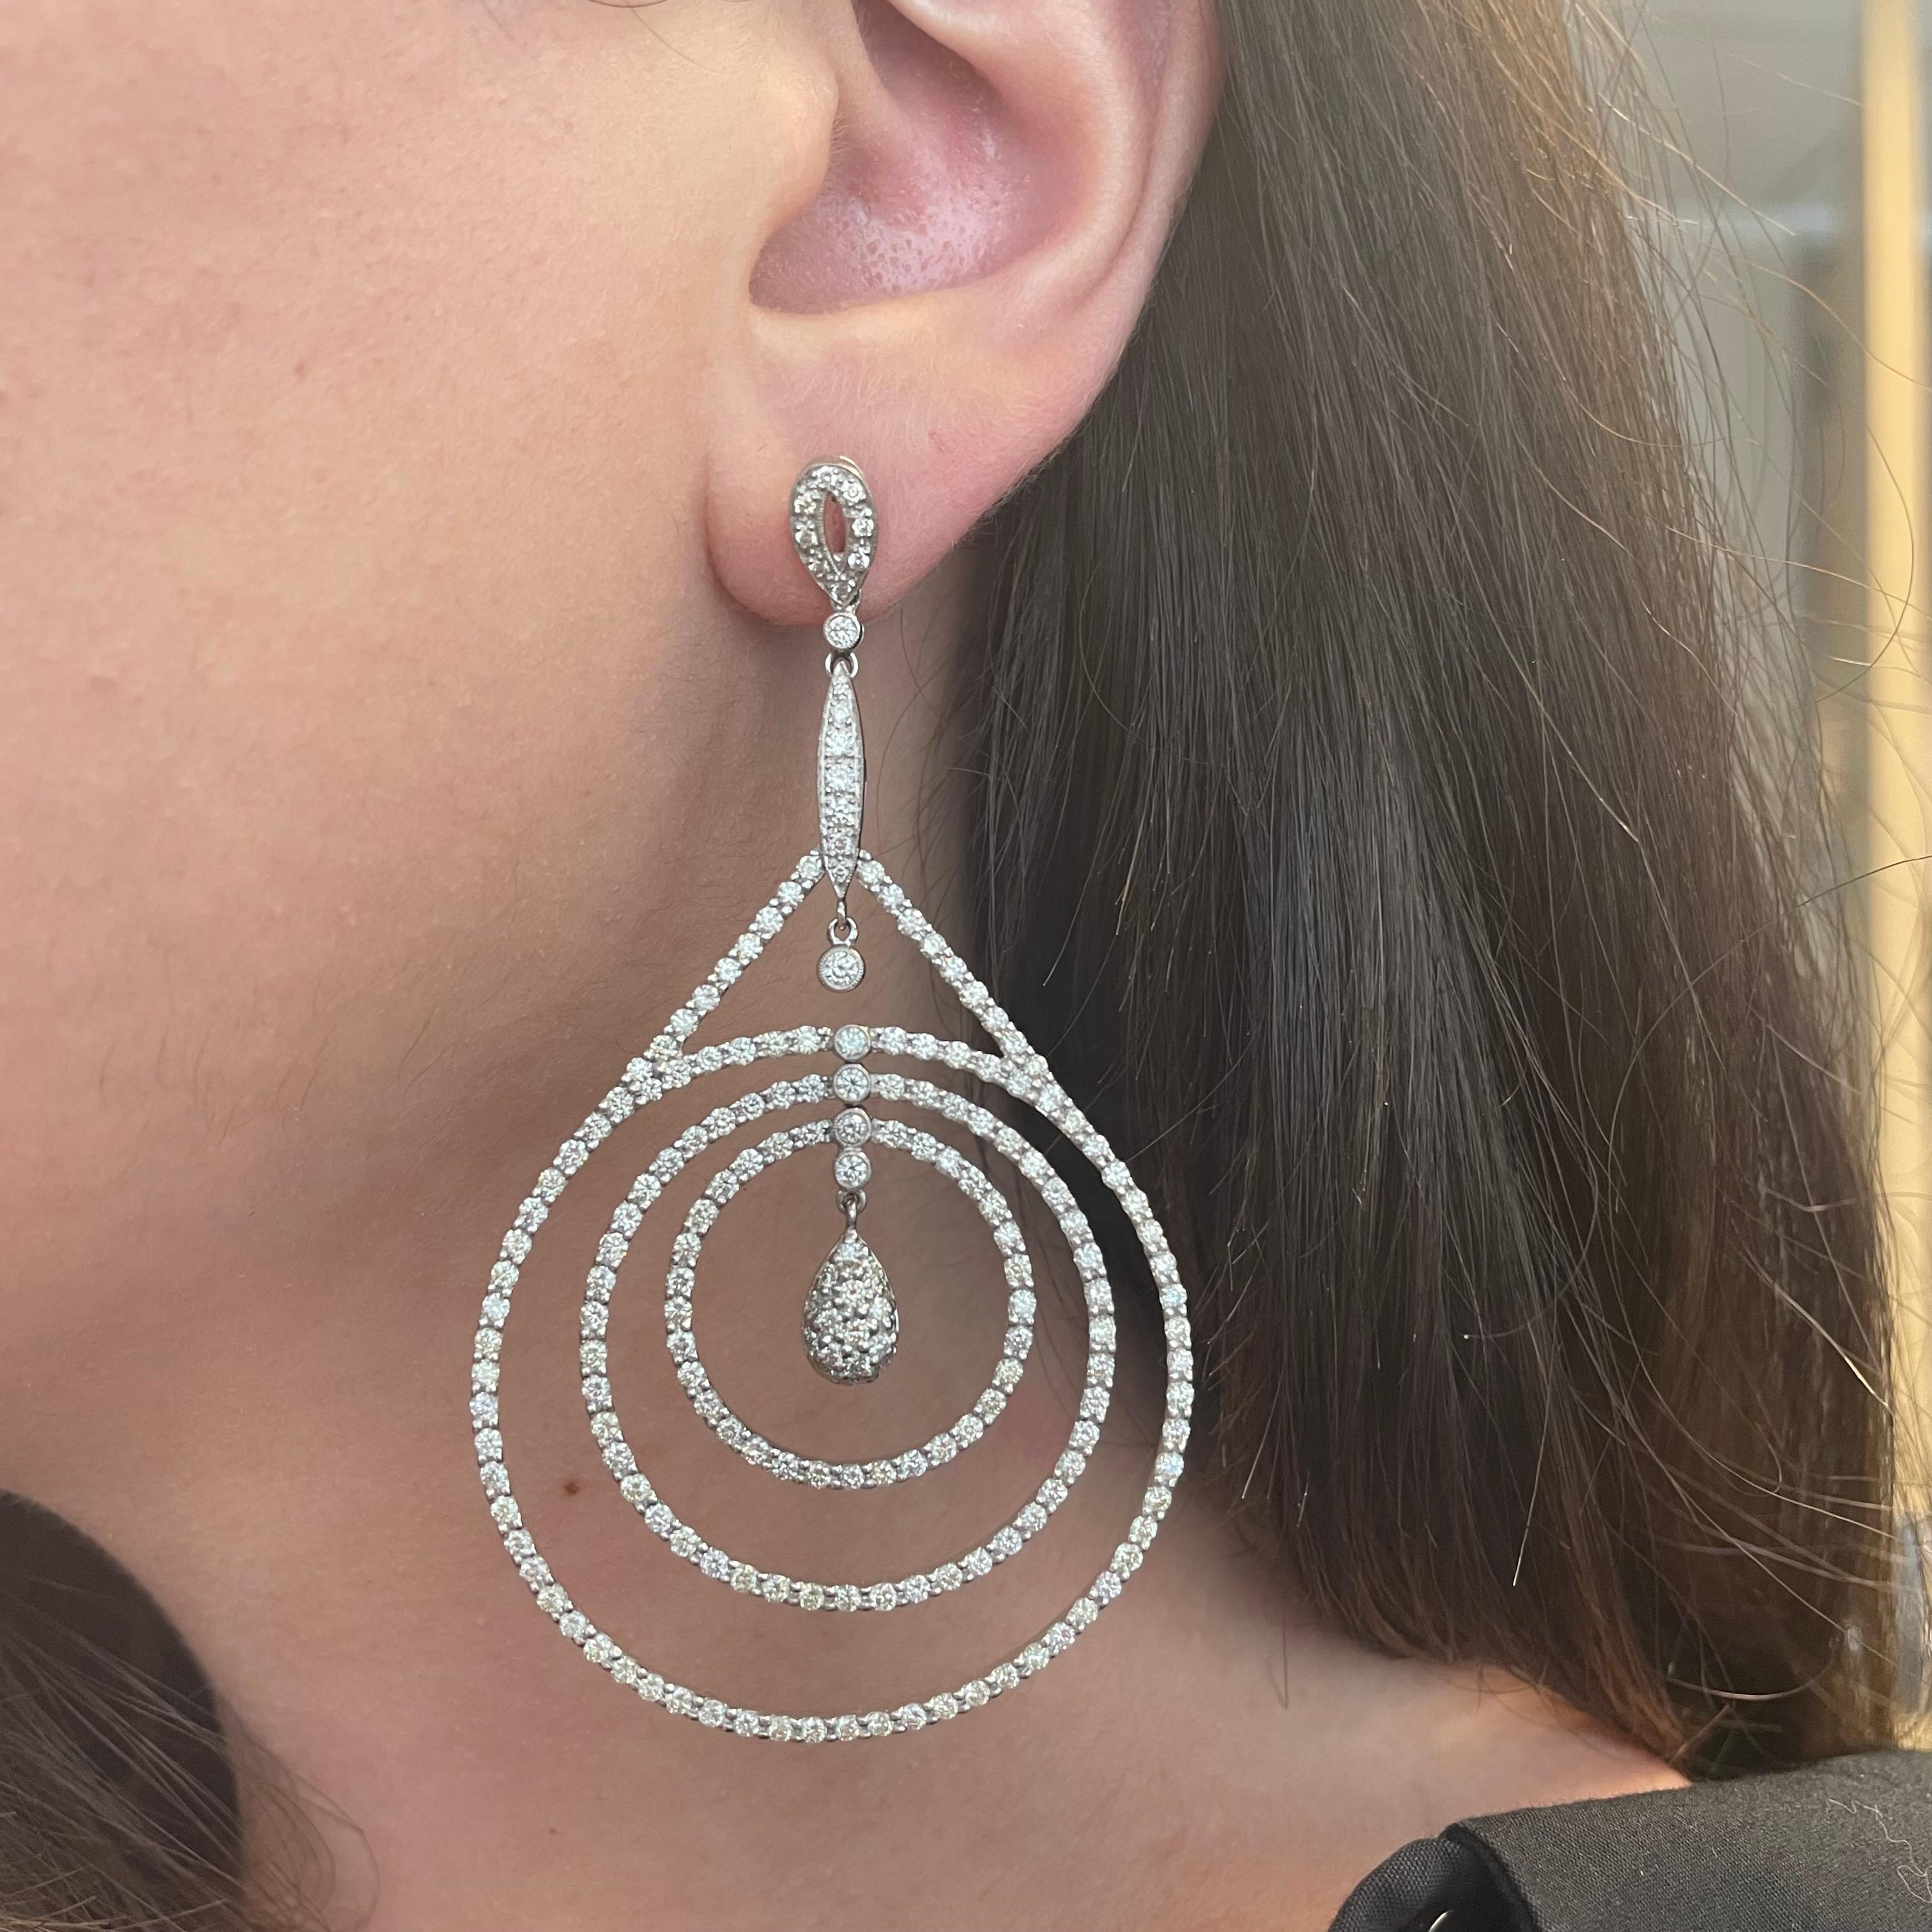 Stunning pave diamond drop earrings.
390 round brilliant diamonds, 7.98 carats total. Approximately H/I color grade and SI clarity grade. Pave, prong, and bezel set, 18k white gold.
Accommodated with an up to date appraisal by a GIA G.G. upon